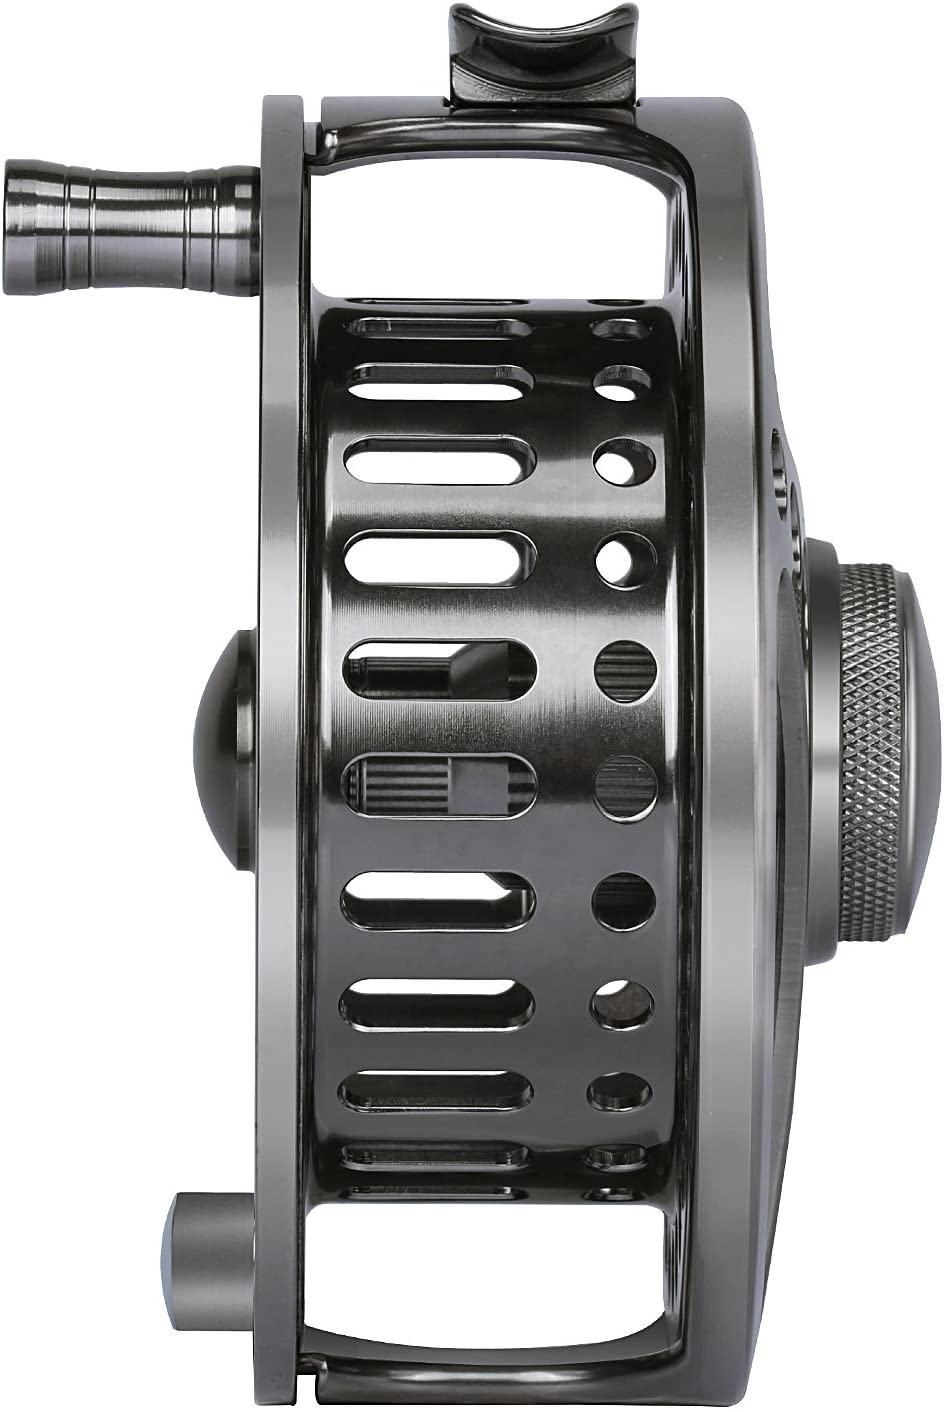 Goture CNC-Machined Large Arbor Fly Fishing Reel